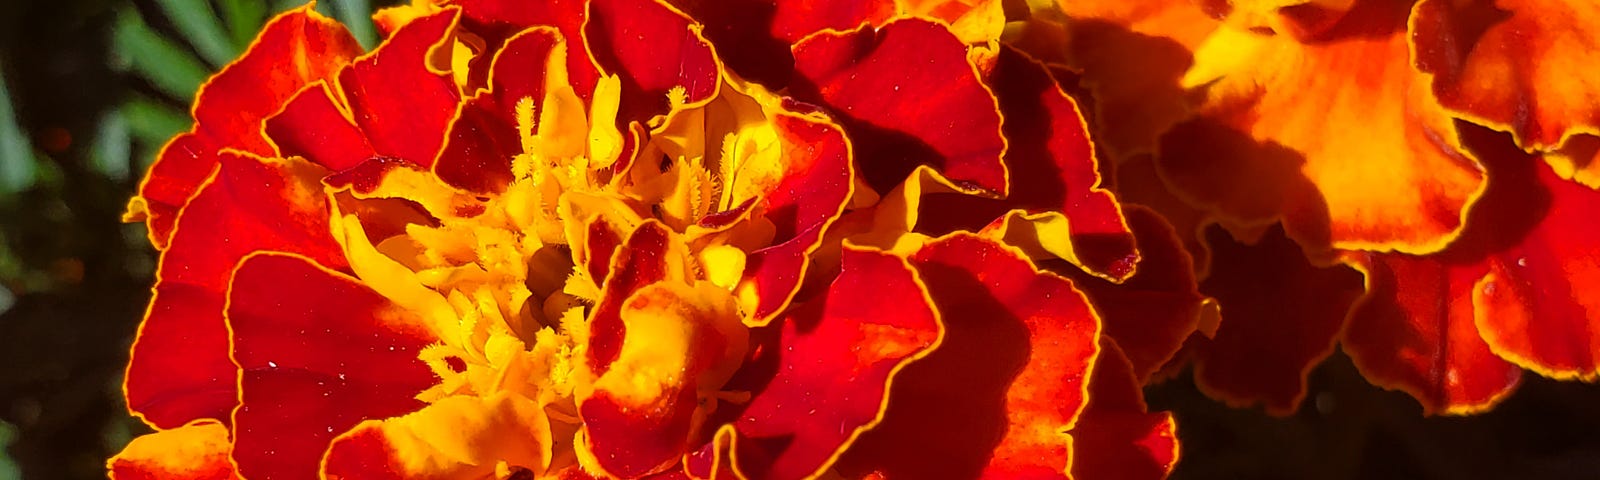 Close-up of a dark orange and yellow frilly petals in layers and yellow stamen in the middle, with a lighter shaded flower behind it.